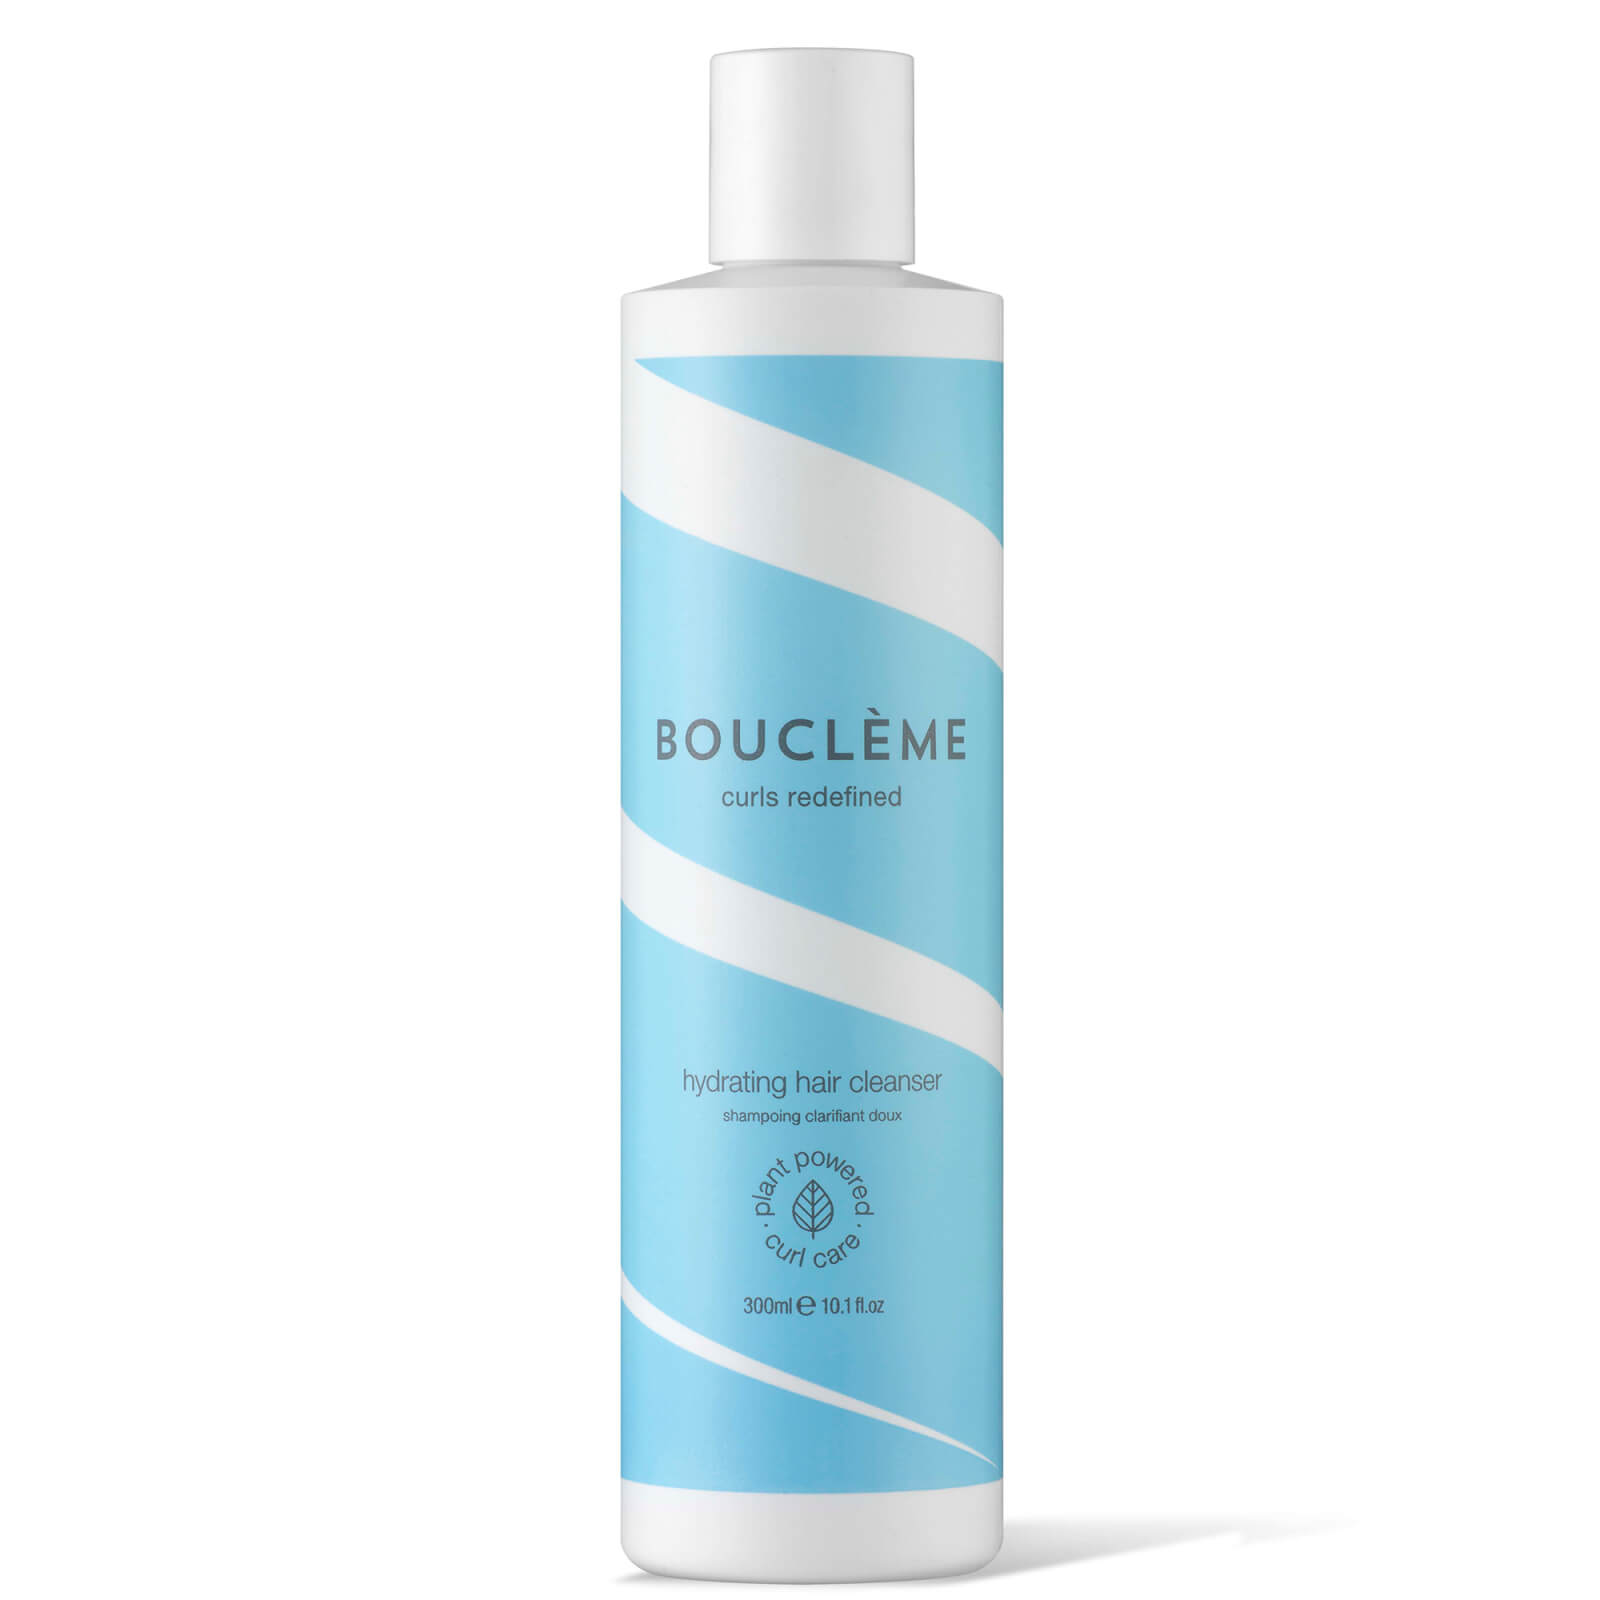 Photos - Facial / Body Cleansing Product Bouclème Hydrating Hair Cleanser 300ml